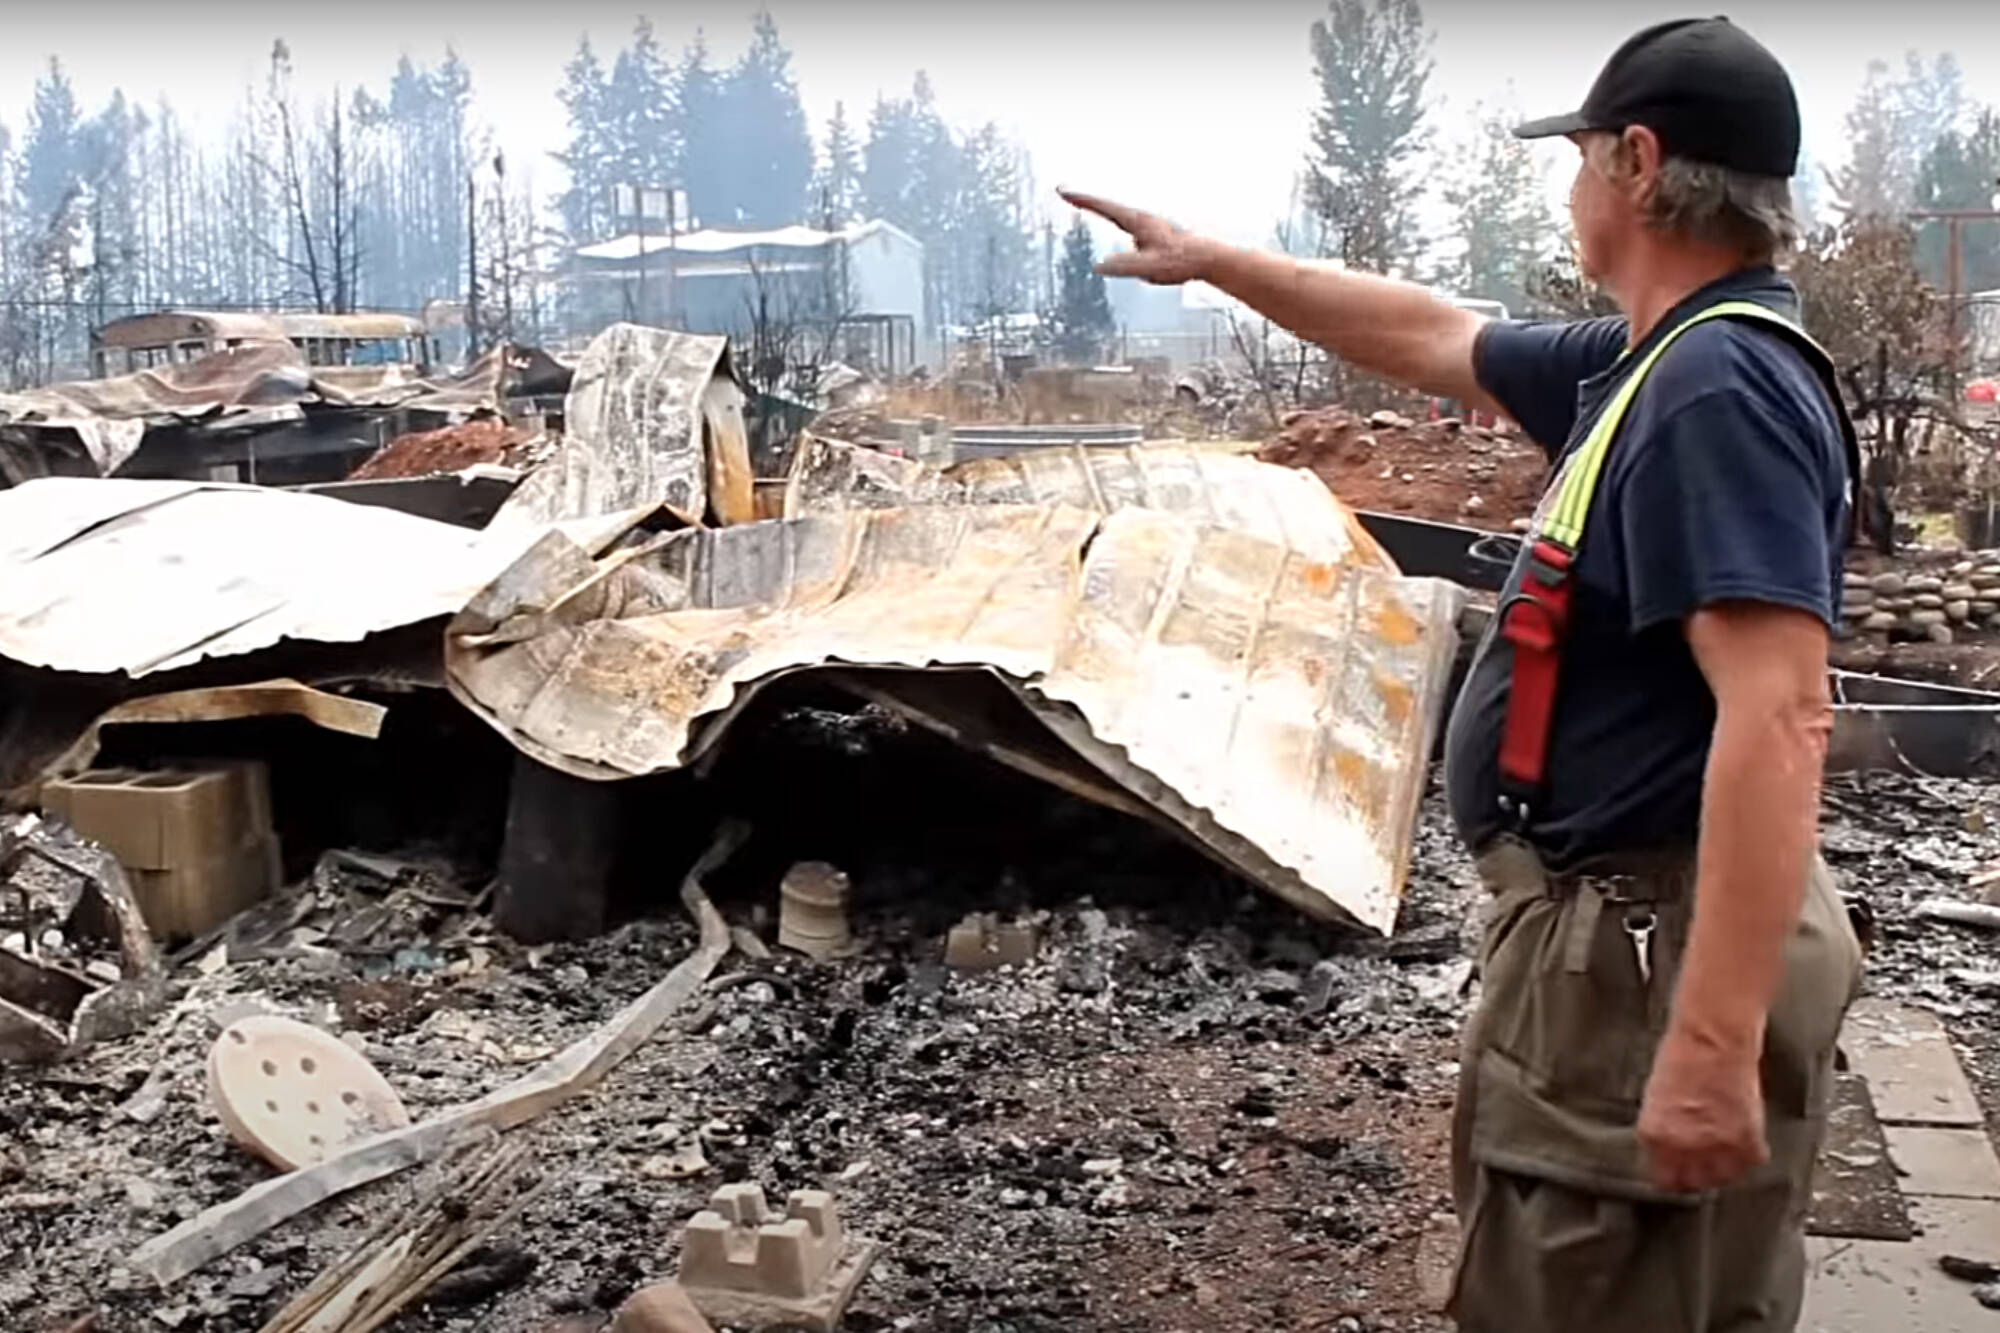 Scotch Creek/Lee Creek firefighter Darren Reynolds looks over the remains of his North Shuswap home that was destroyed Friday, Aug. 18, by the Bush Creek East wildfire. (CSRD image)